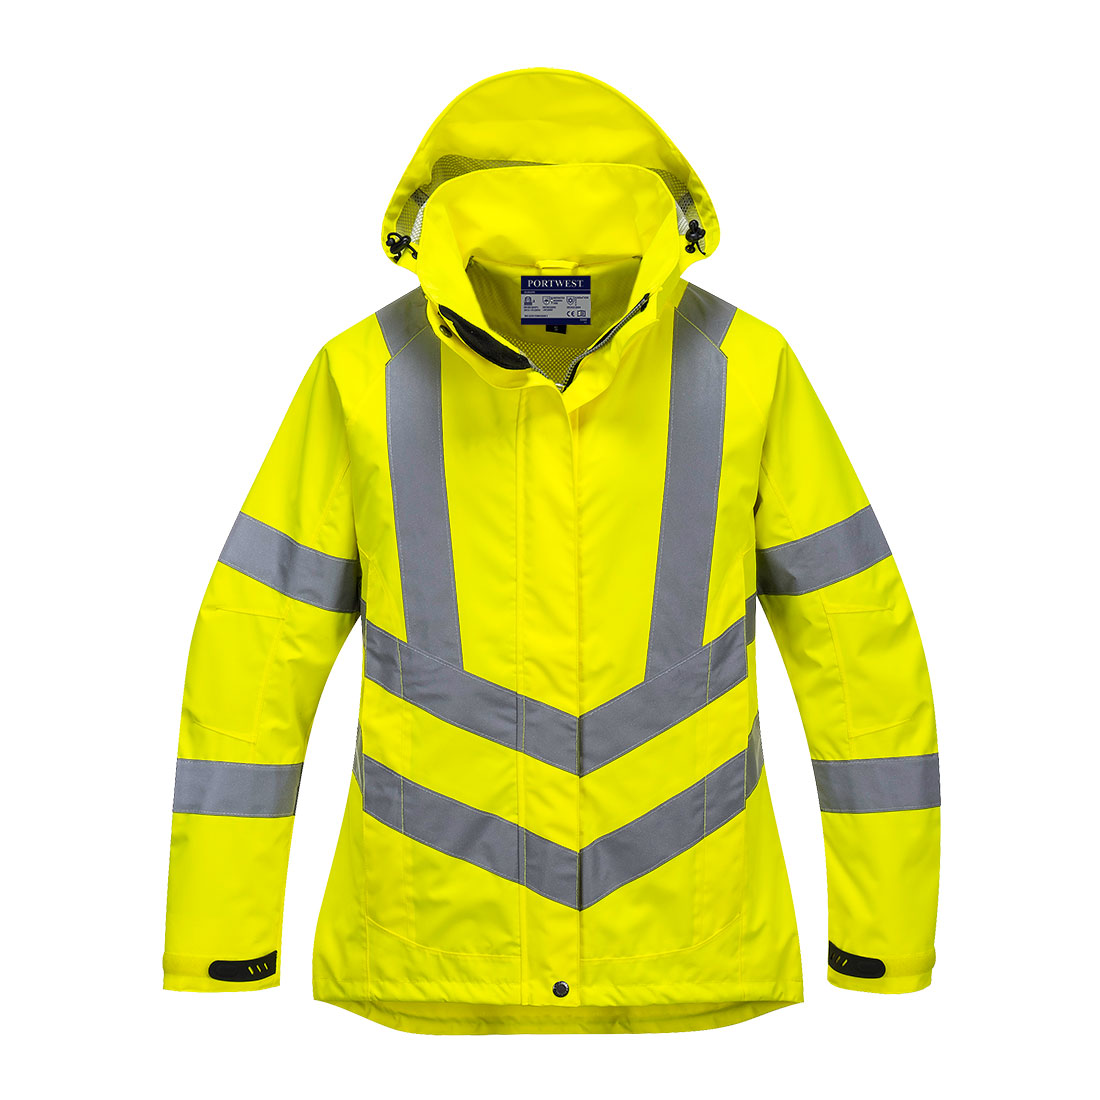 Ladies HiVis Breathable Jacket, Yellow     Size XL R/Fit